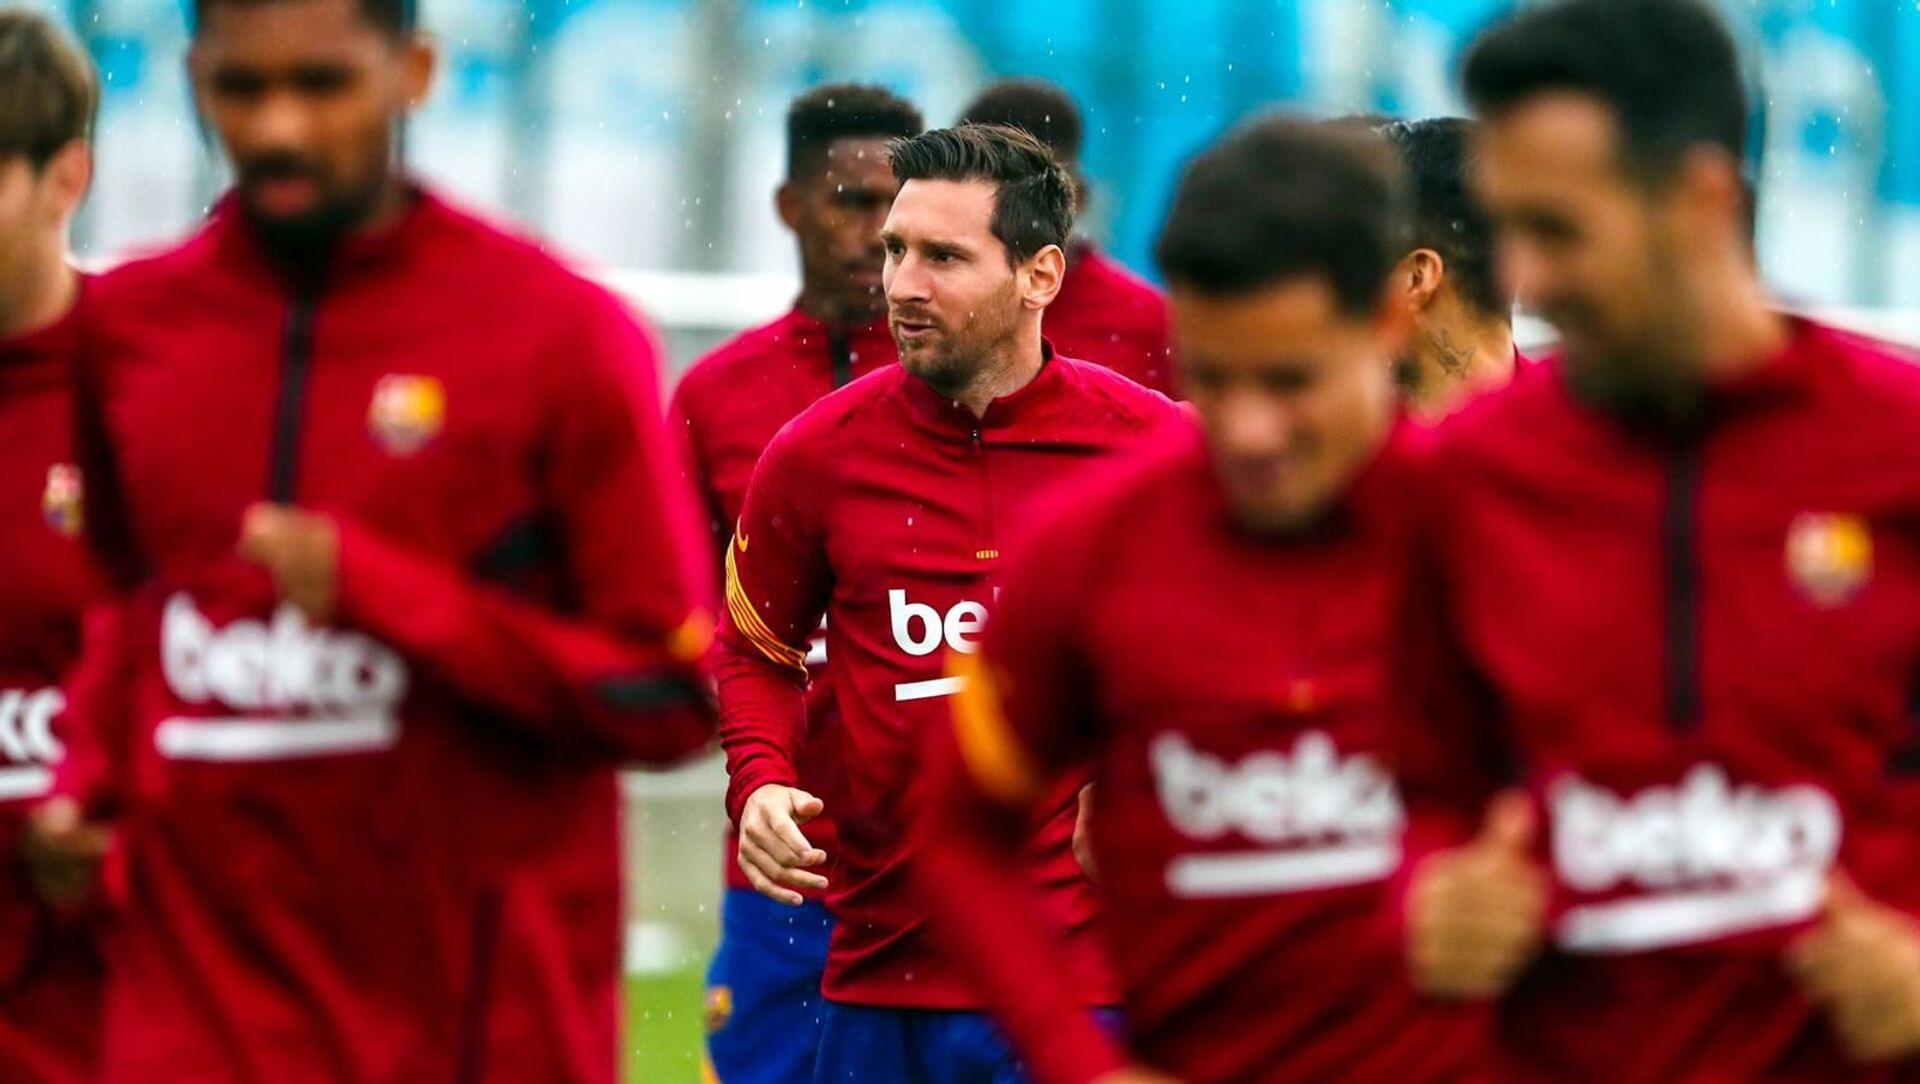 First workout of the day Lionel Messi - اسپوتنیک افغانستان  , 1920, 26.02.2021